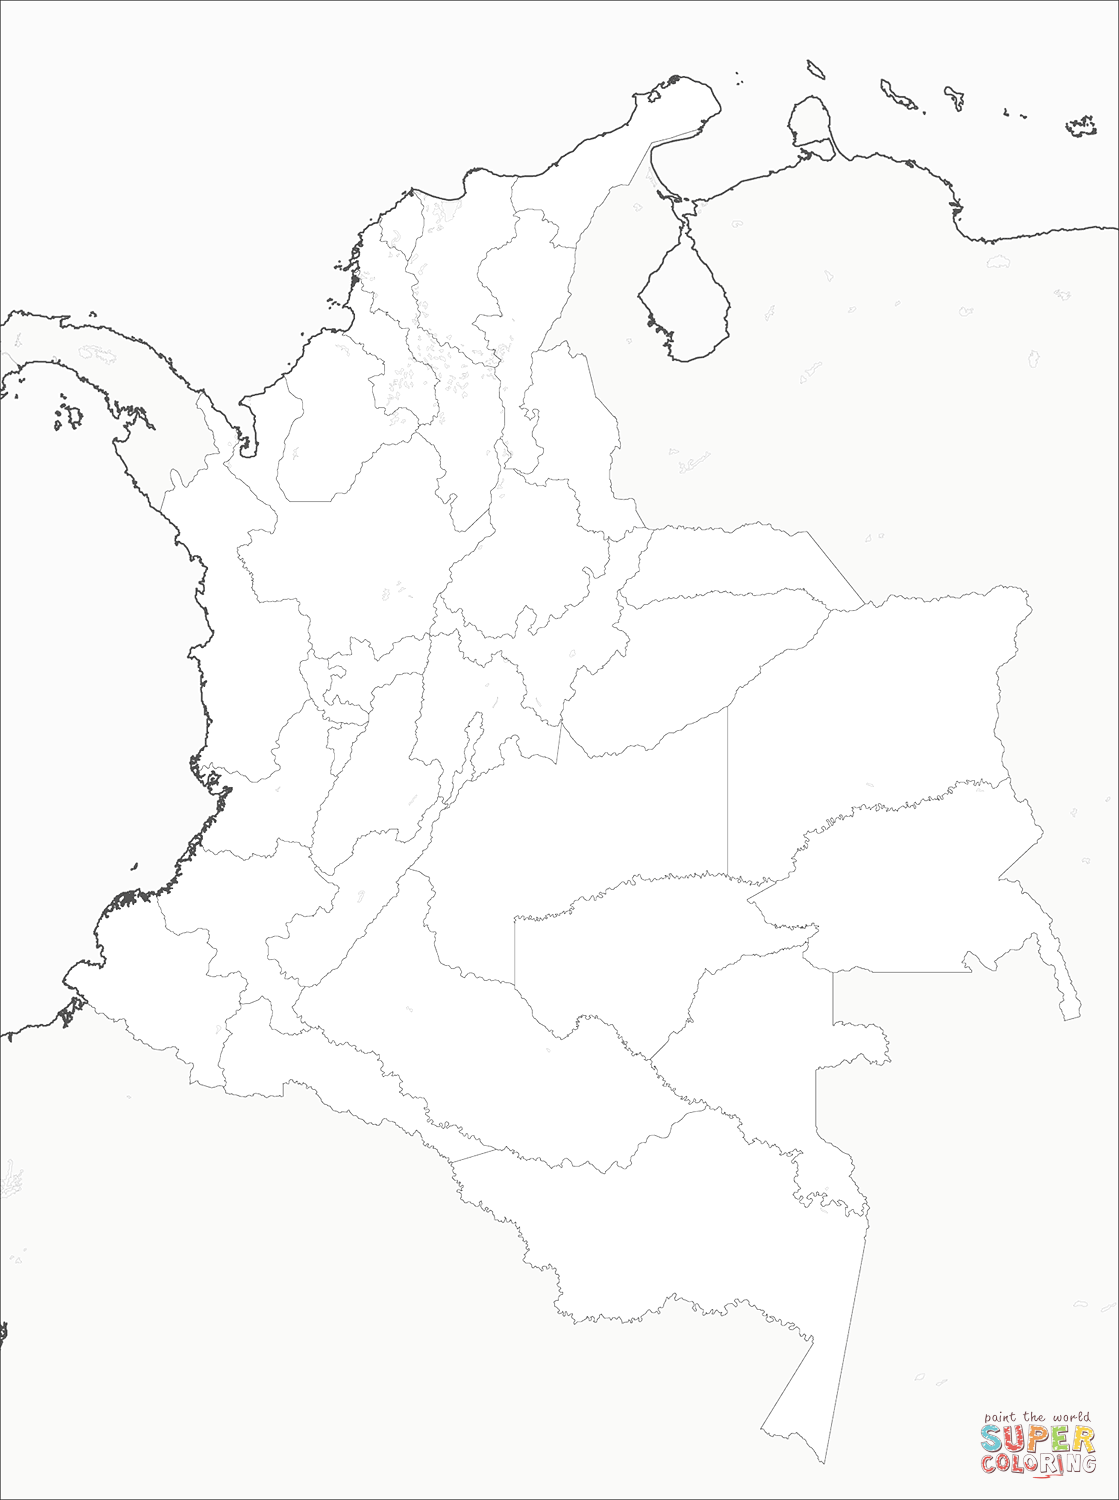 Colombia Map coloring page | Free Printable Coloring Pages